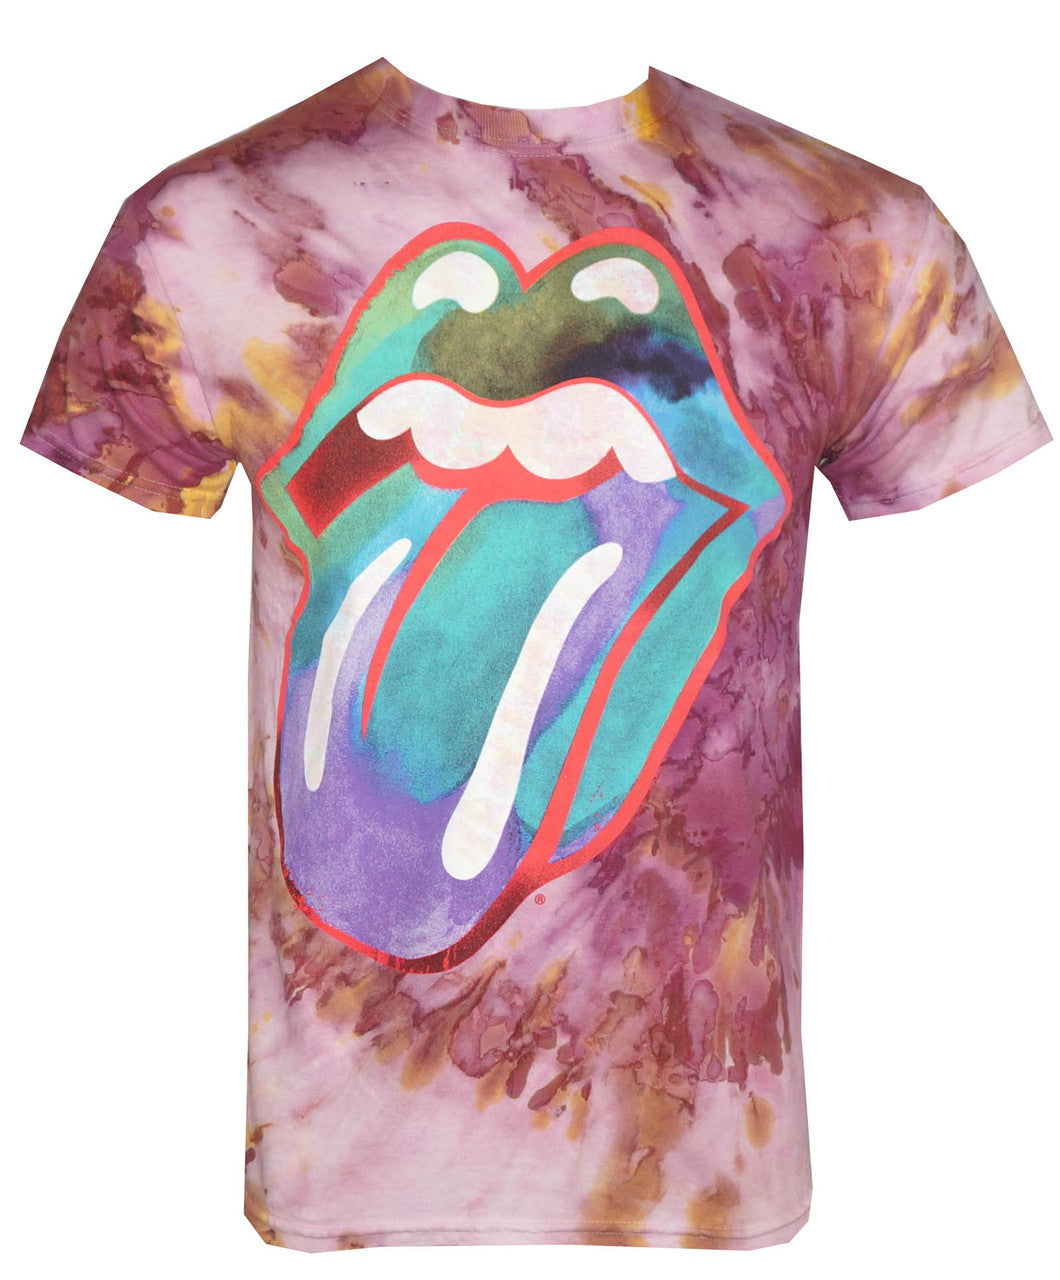 Rolling Stones Multi-Colored Tongue Tie-Dye T-Shirt